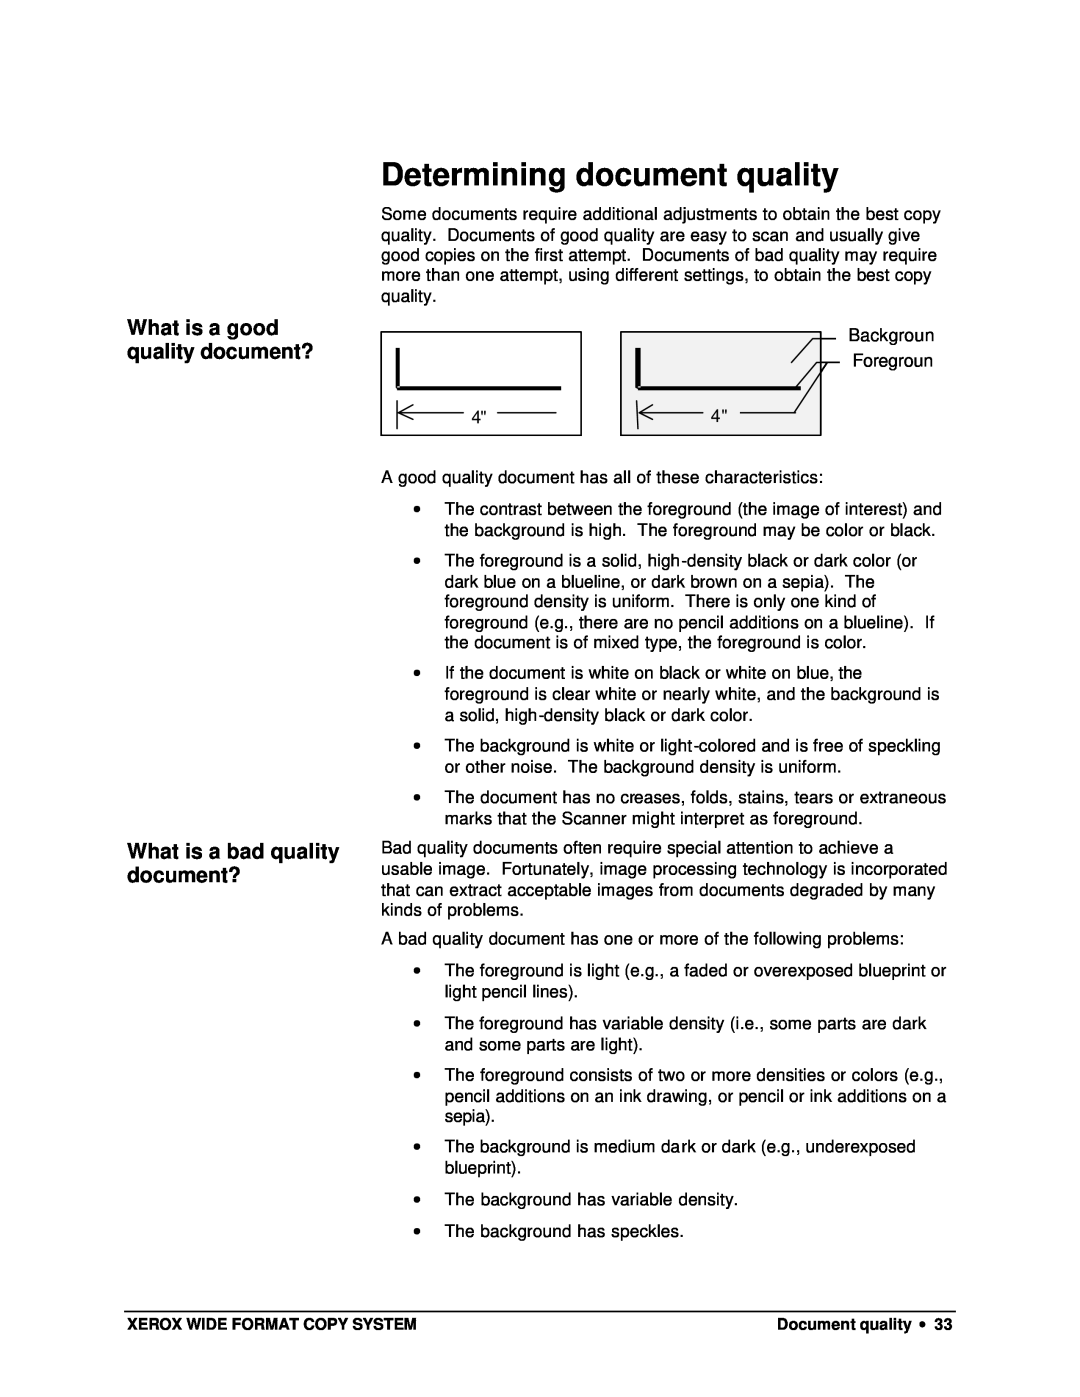 Xerox X2, 8825, 8850, 8830 Determining document quality, What is a good quality document?, What is a bad quality document? 